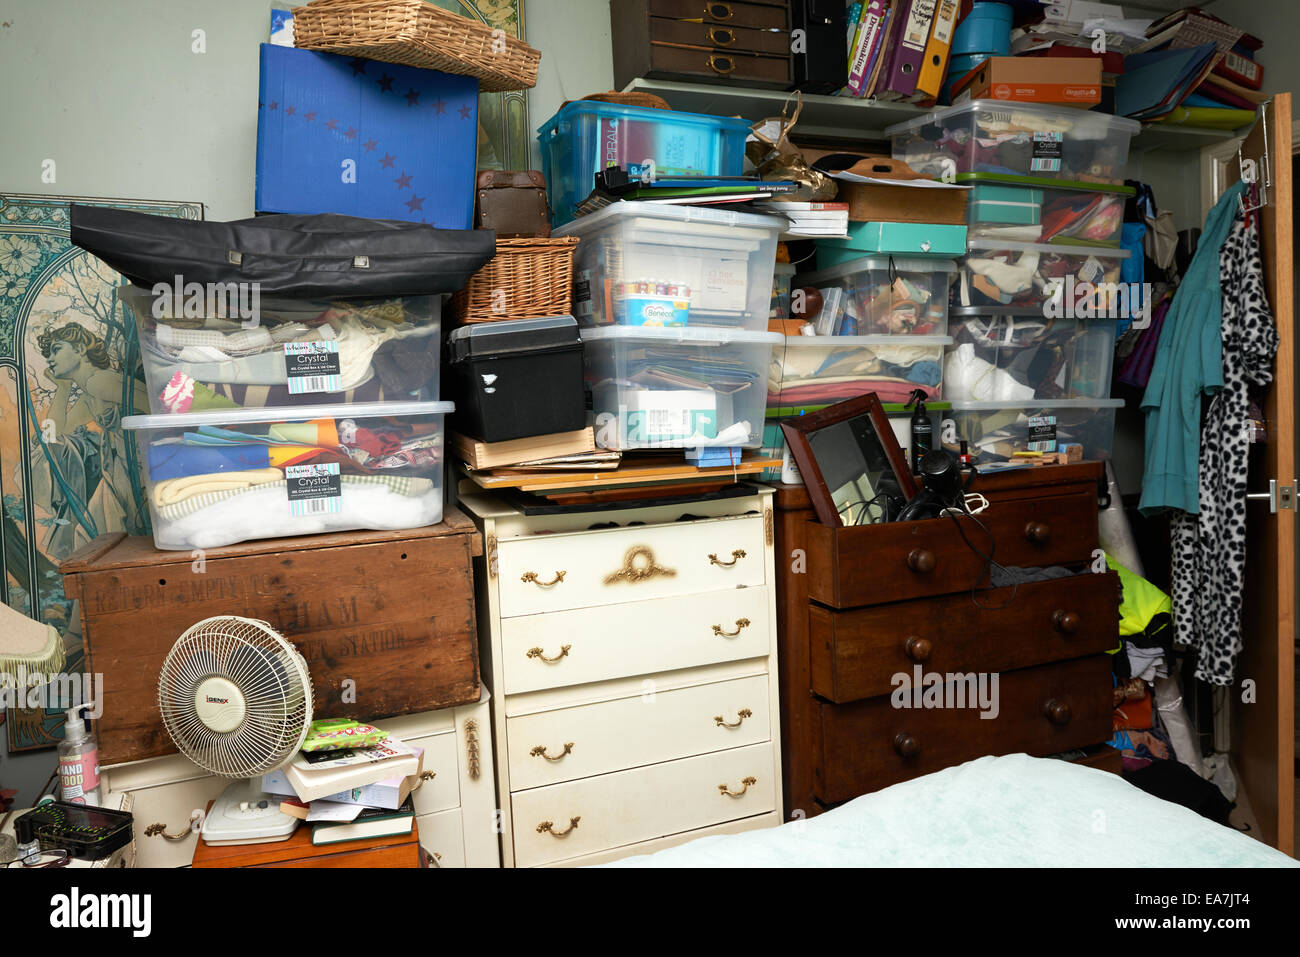 Womans bedroom filled with clutter Stock Photo